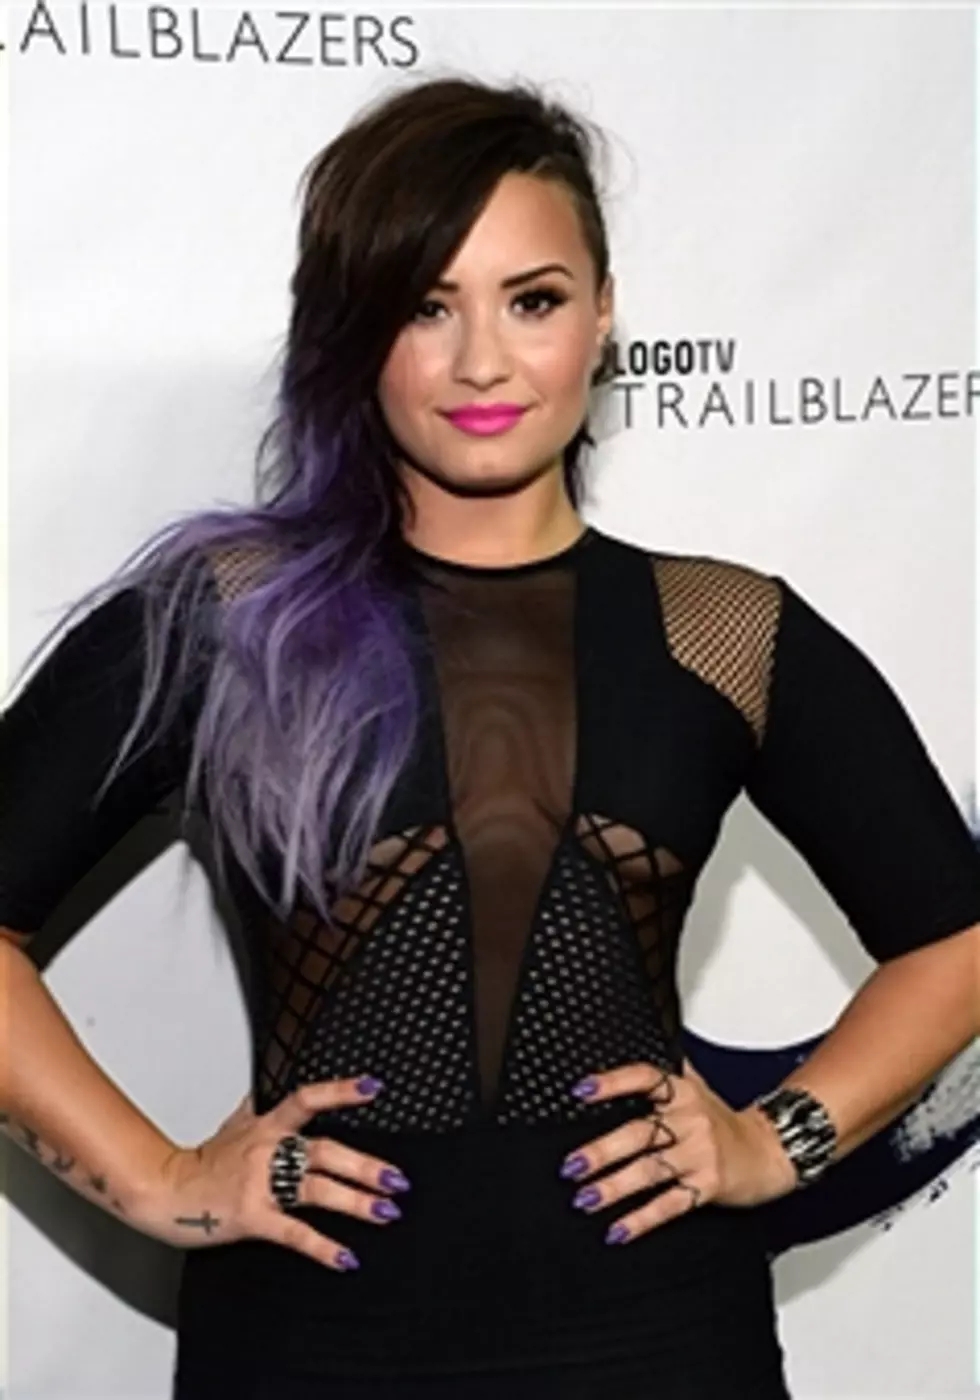 Demi Lovato ‘Really Don’t Care About That’ [VIDEO]